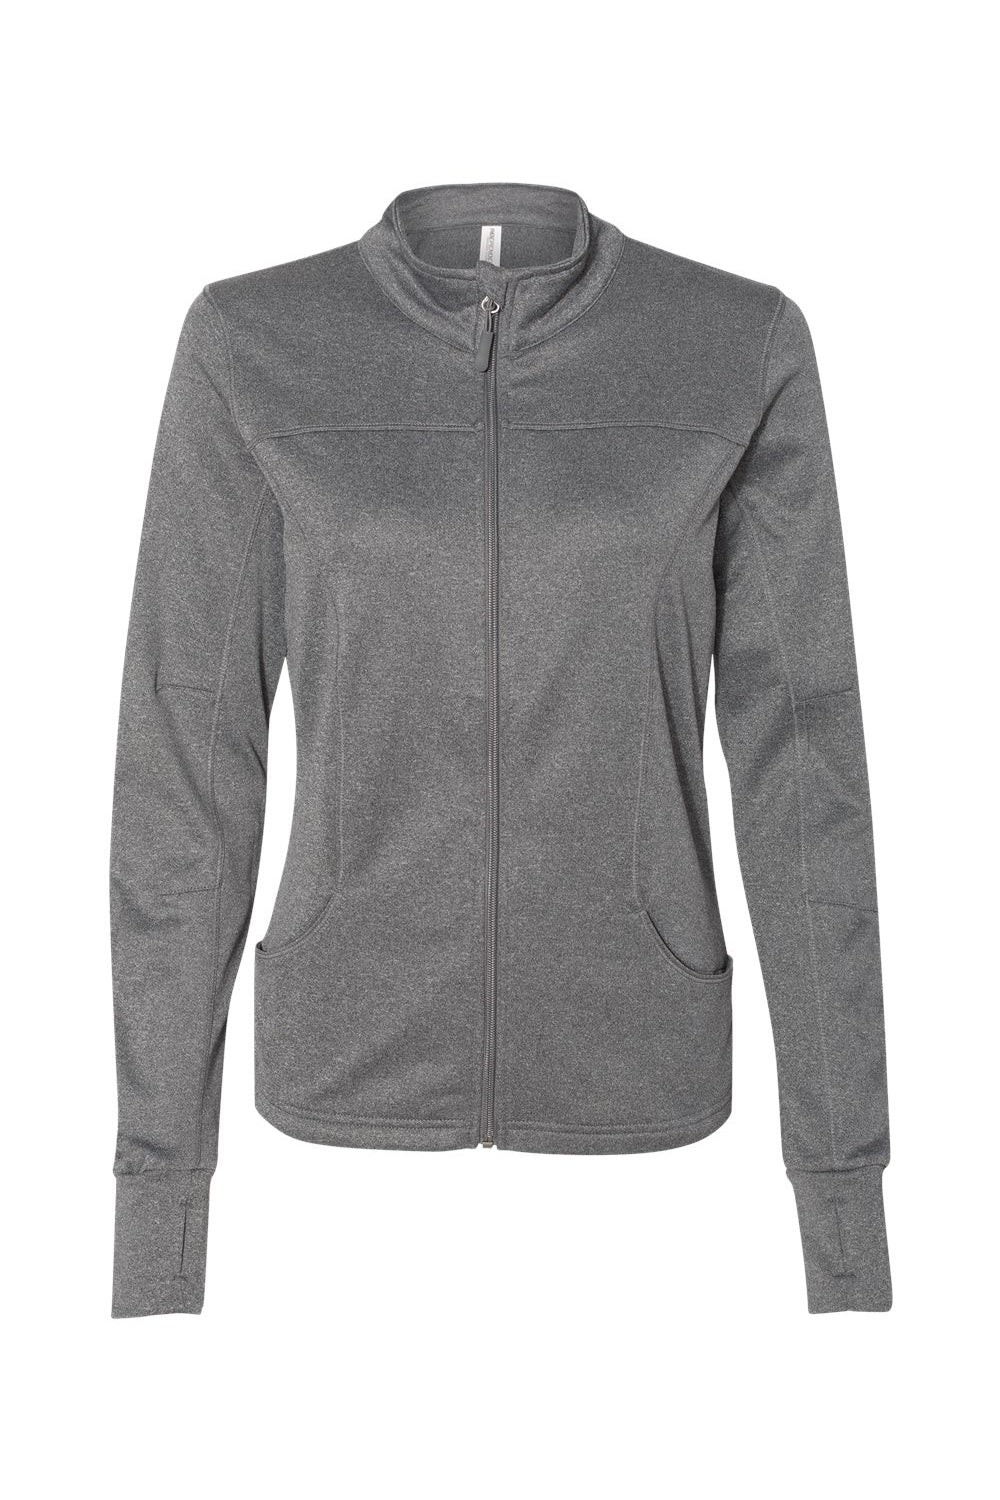 Independent Trading Co. EXP60PAZ Womens Poly Tech Full Zip Track Jacket Heather Gunmetal Grey Flat Front